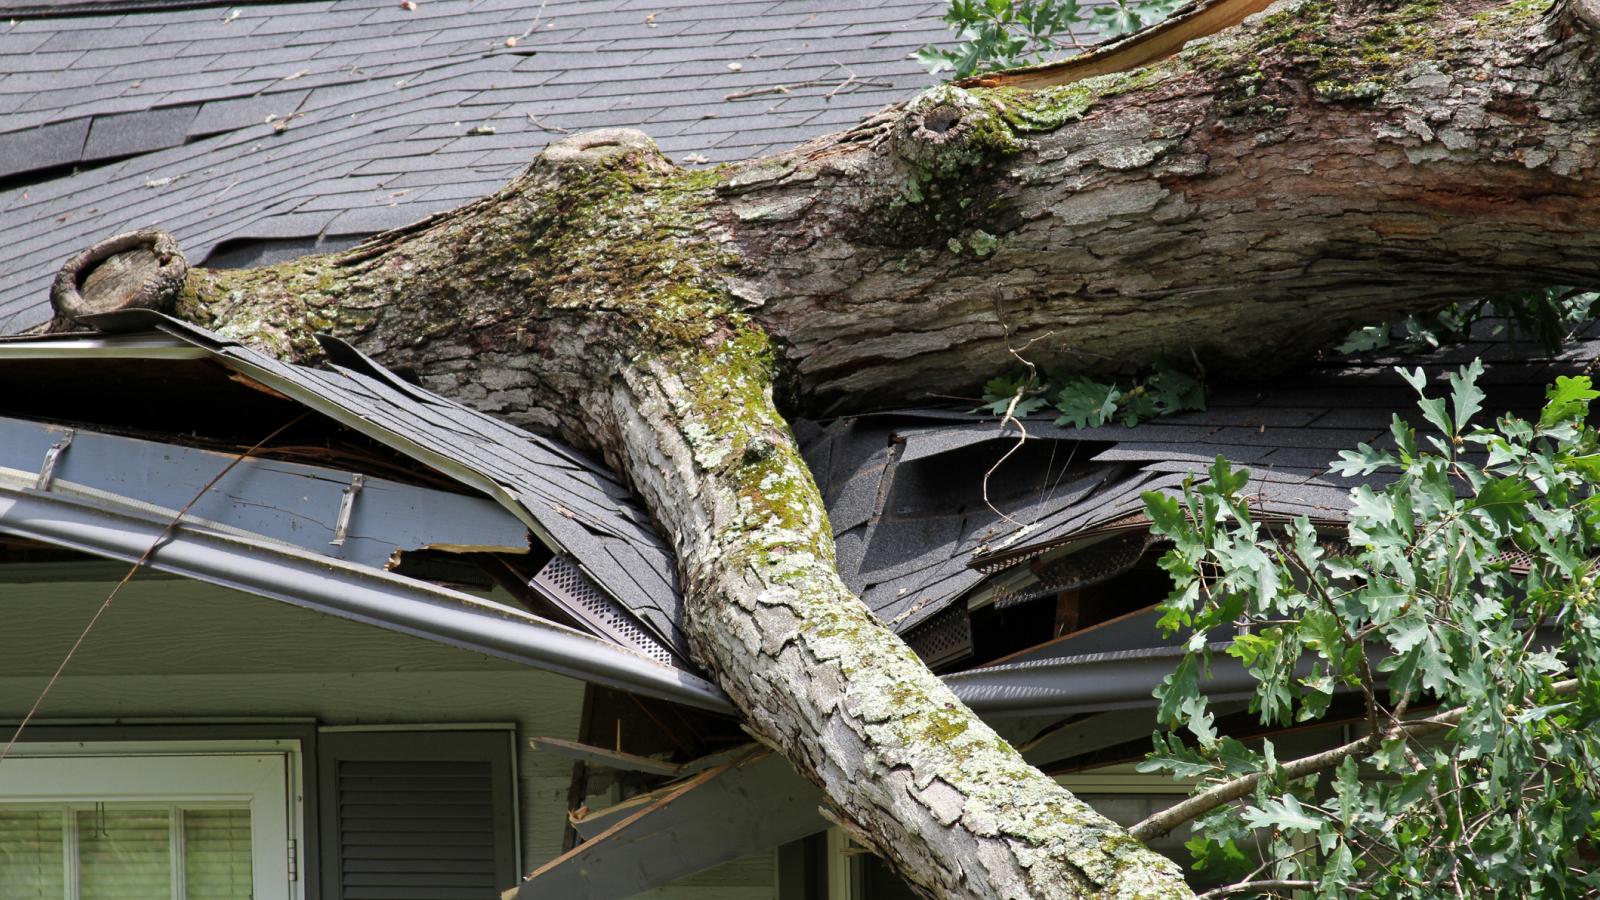 Damage to roof because of a fallen tree